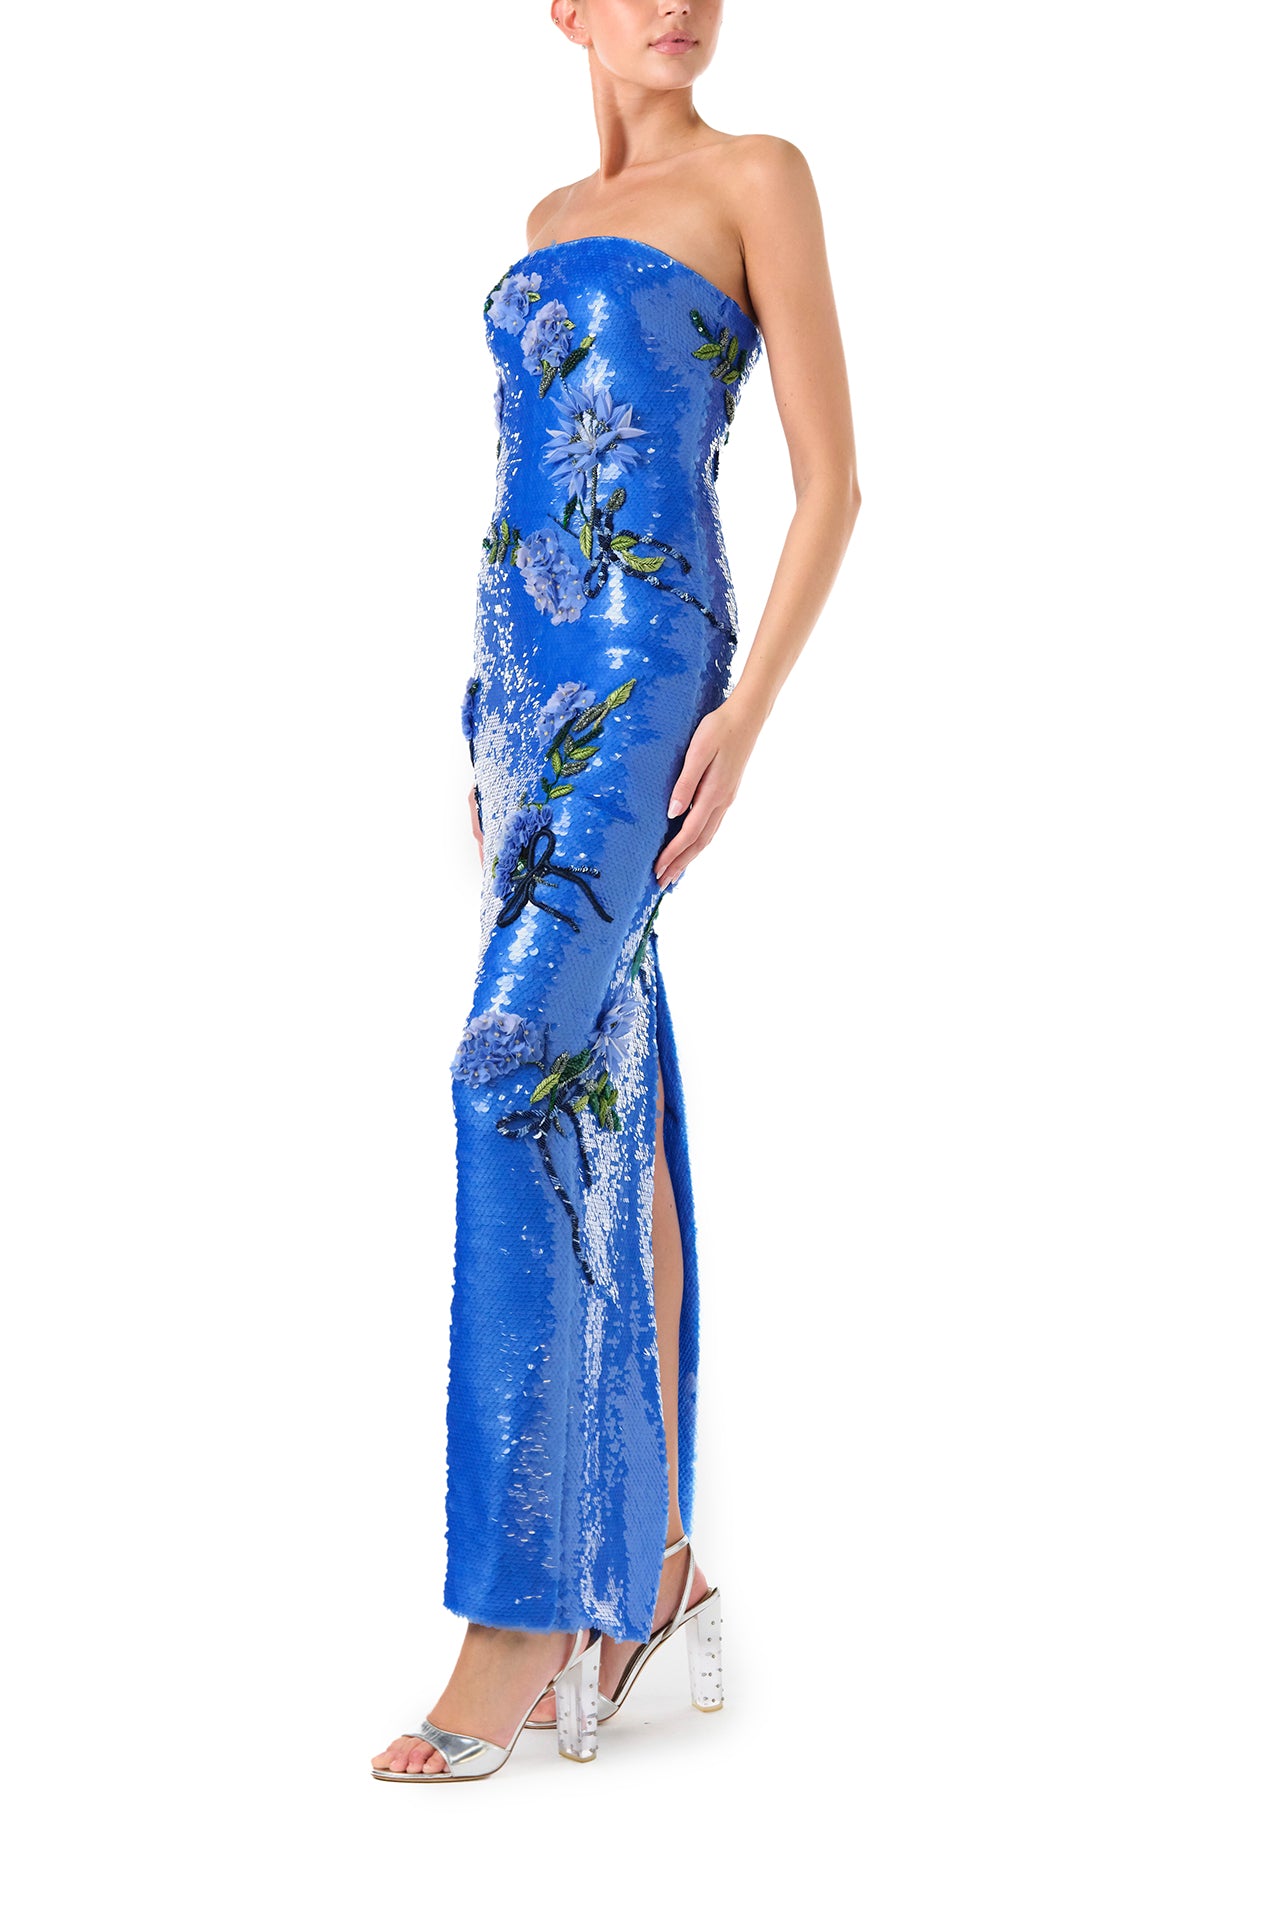 Monique Lhuillier Fall 2024 fitted, strapless column gown in Sky Blue sequin and Floral embroidery - left side.